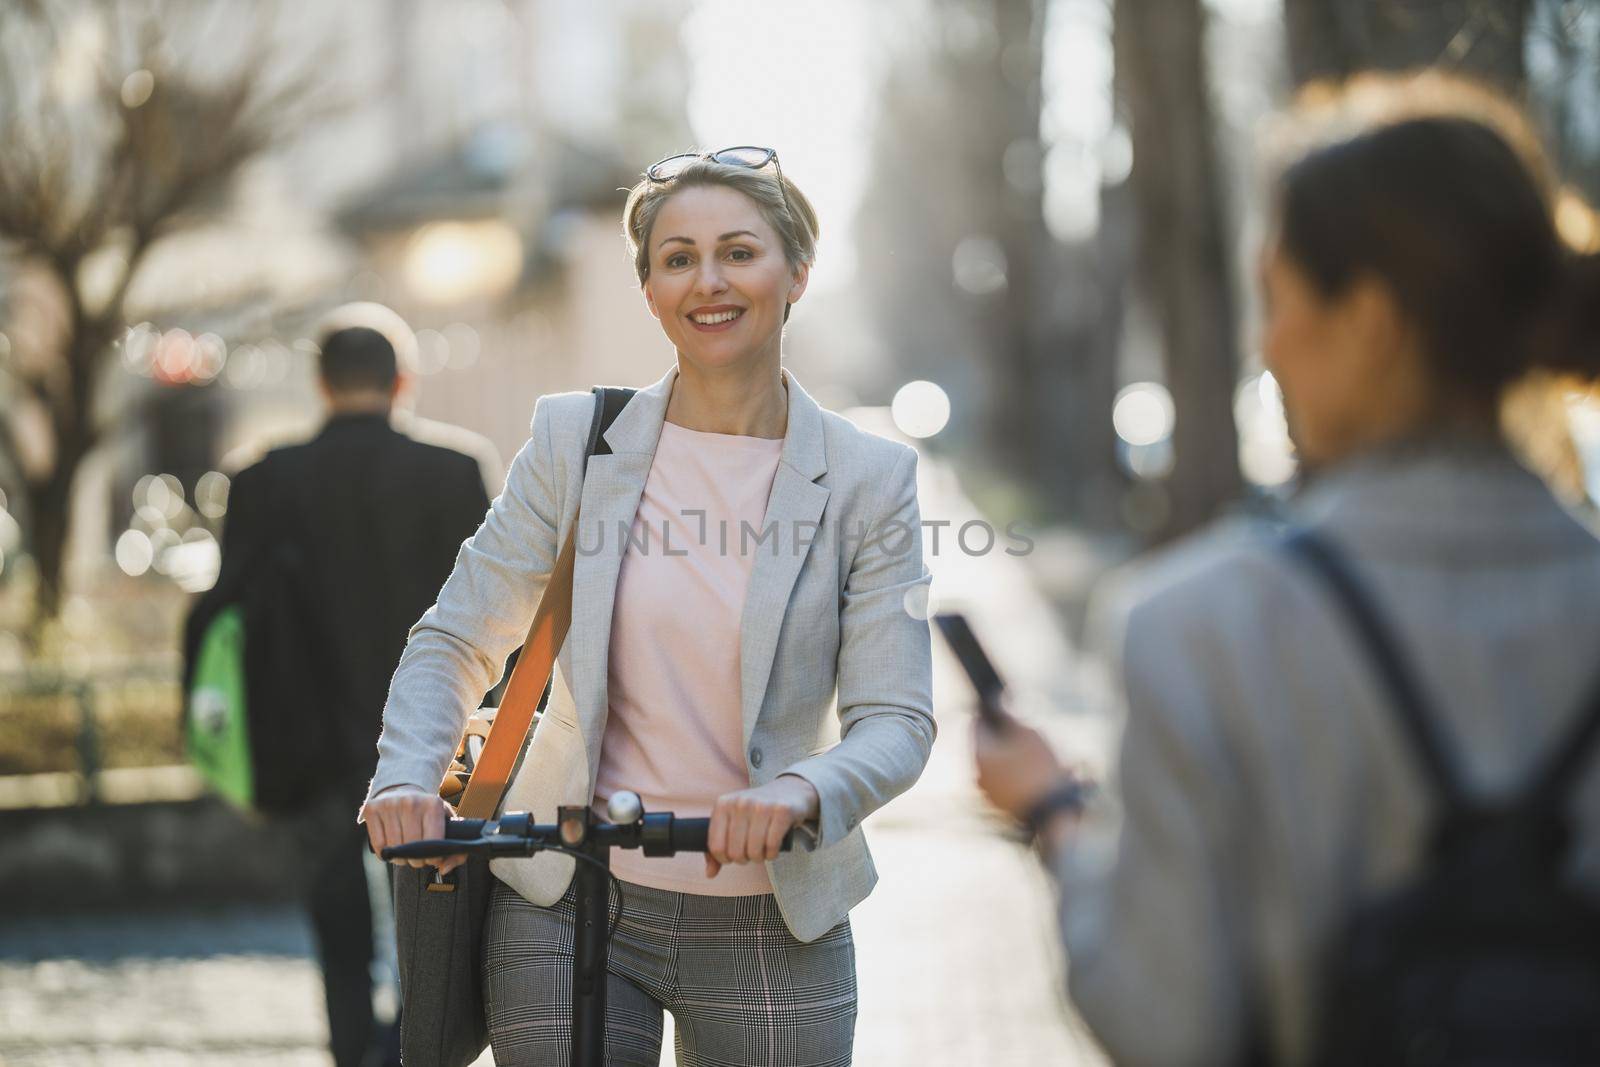 A mature business woman riding an electric scooter on her way to work.